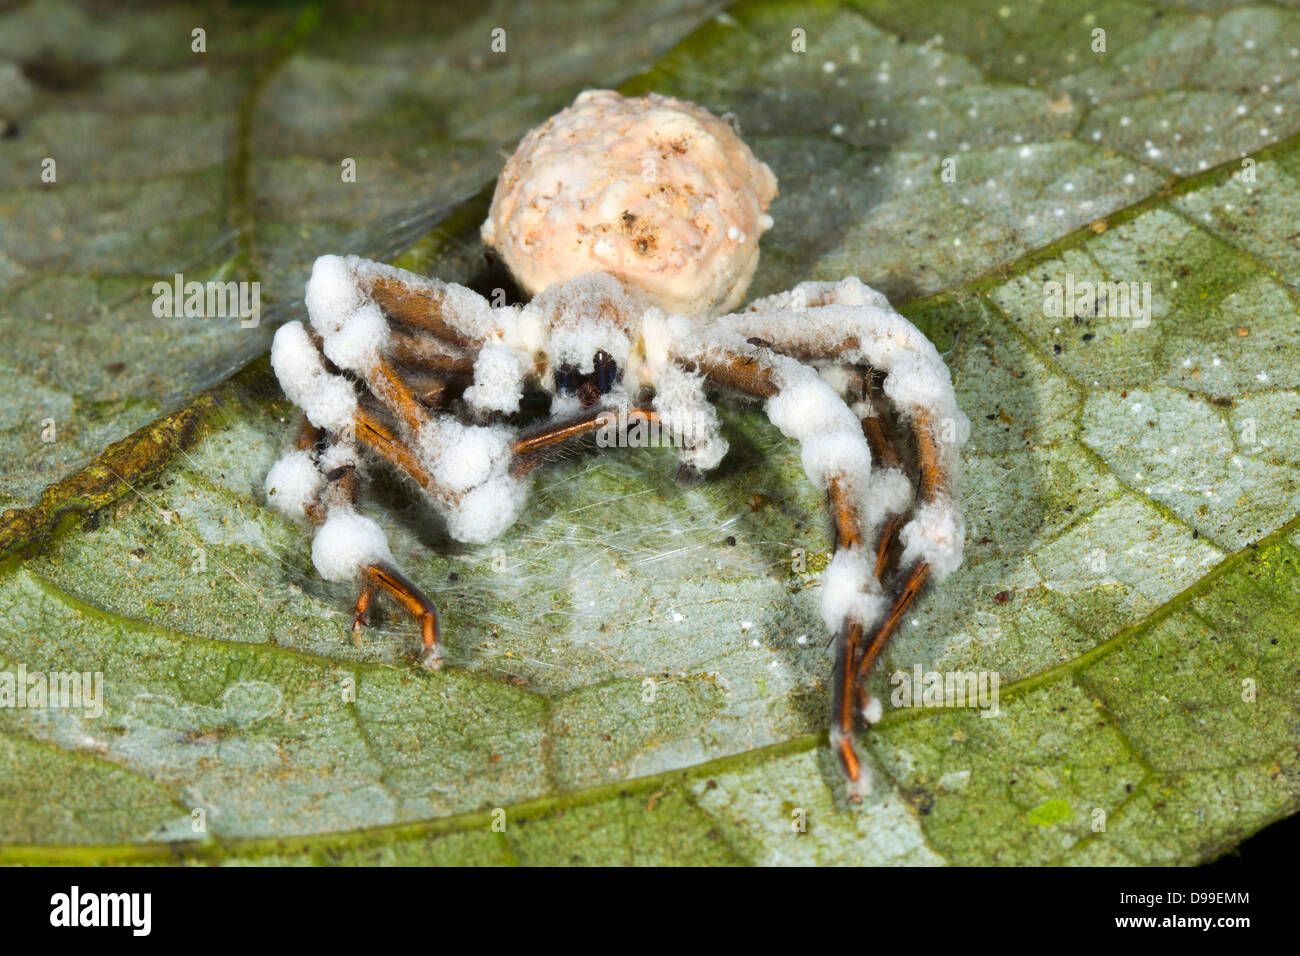 Large spider parasitized and killed by a Cordyceps fungus in the rainforest understory, Ecuador Stock Photo